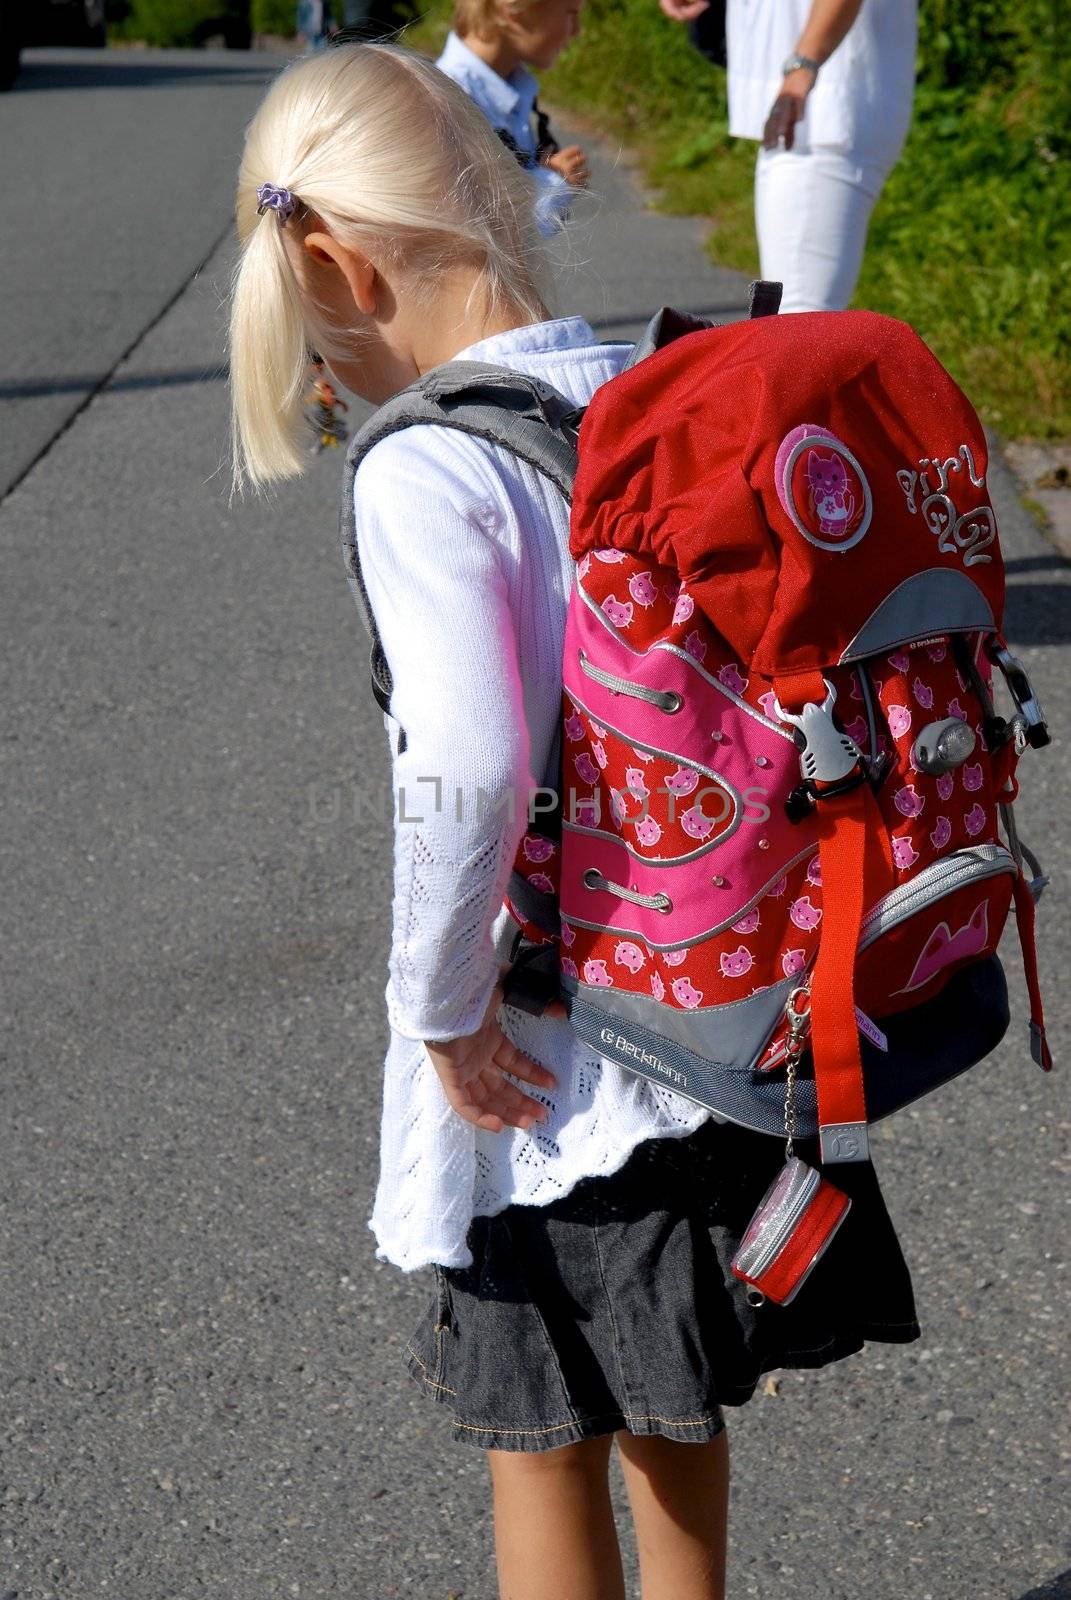 a girl with red schoolbag. Please note: No negative use allowed.